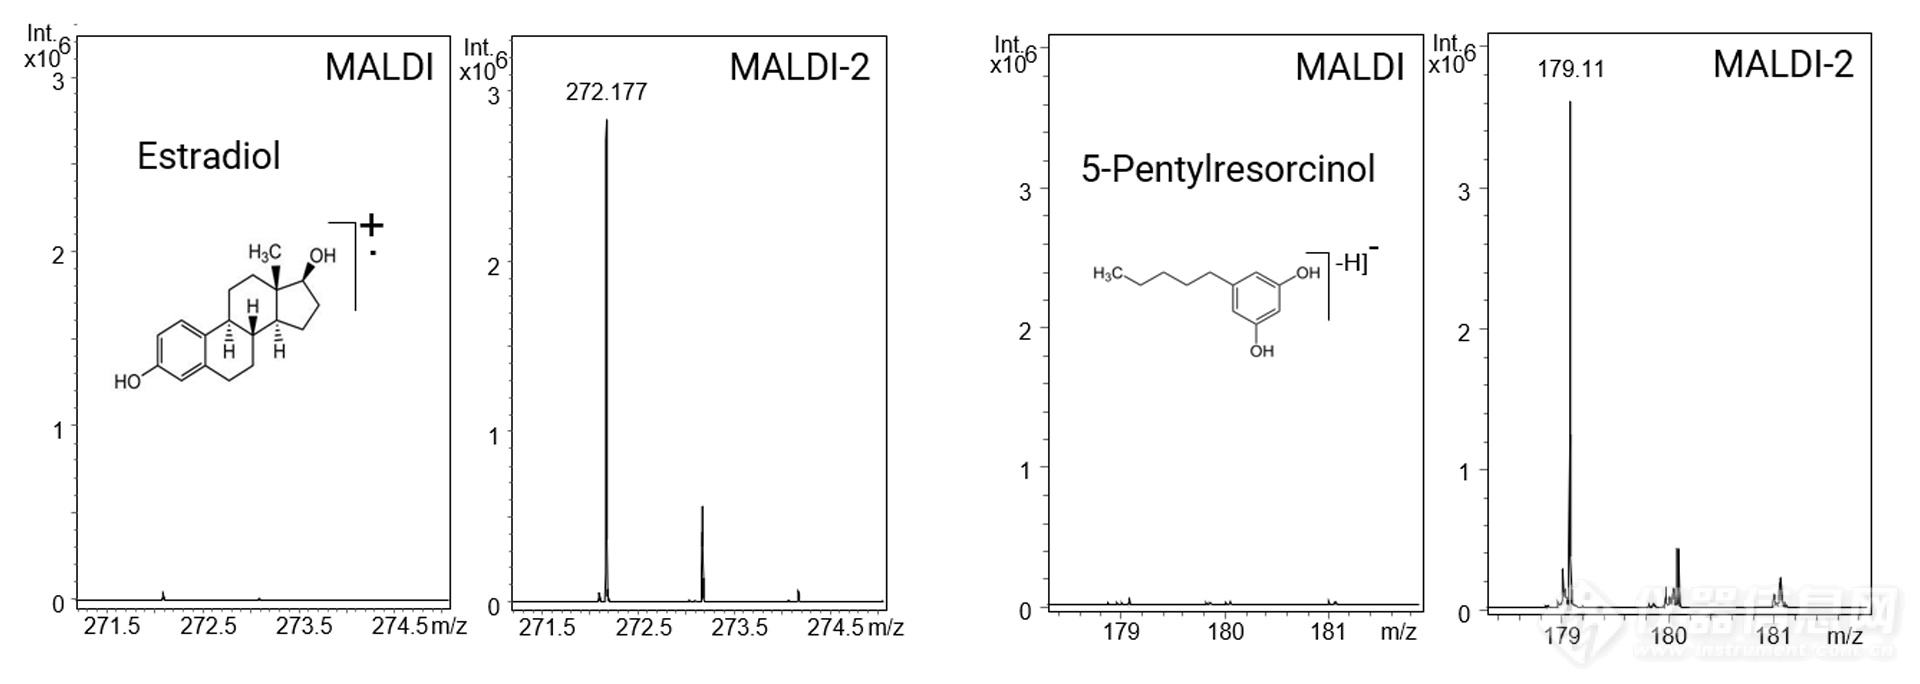 maldi-2-expanded-chemical-space-quer.png